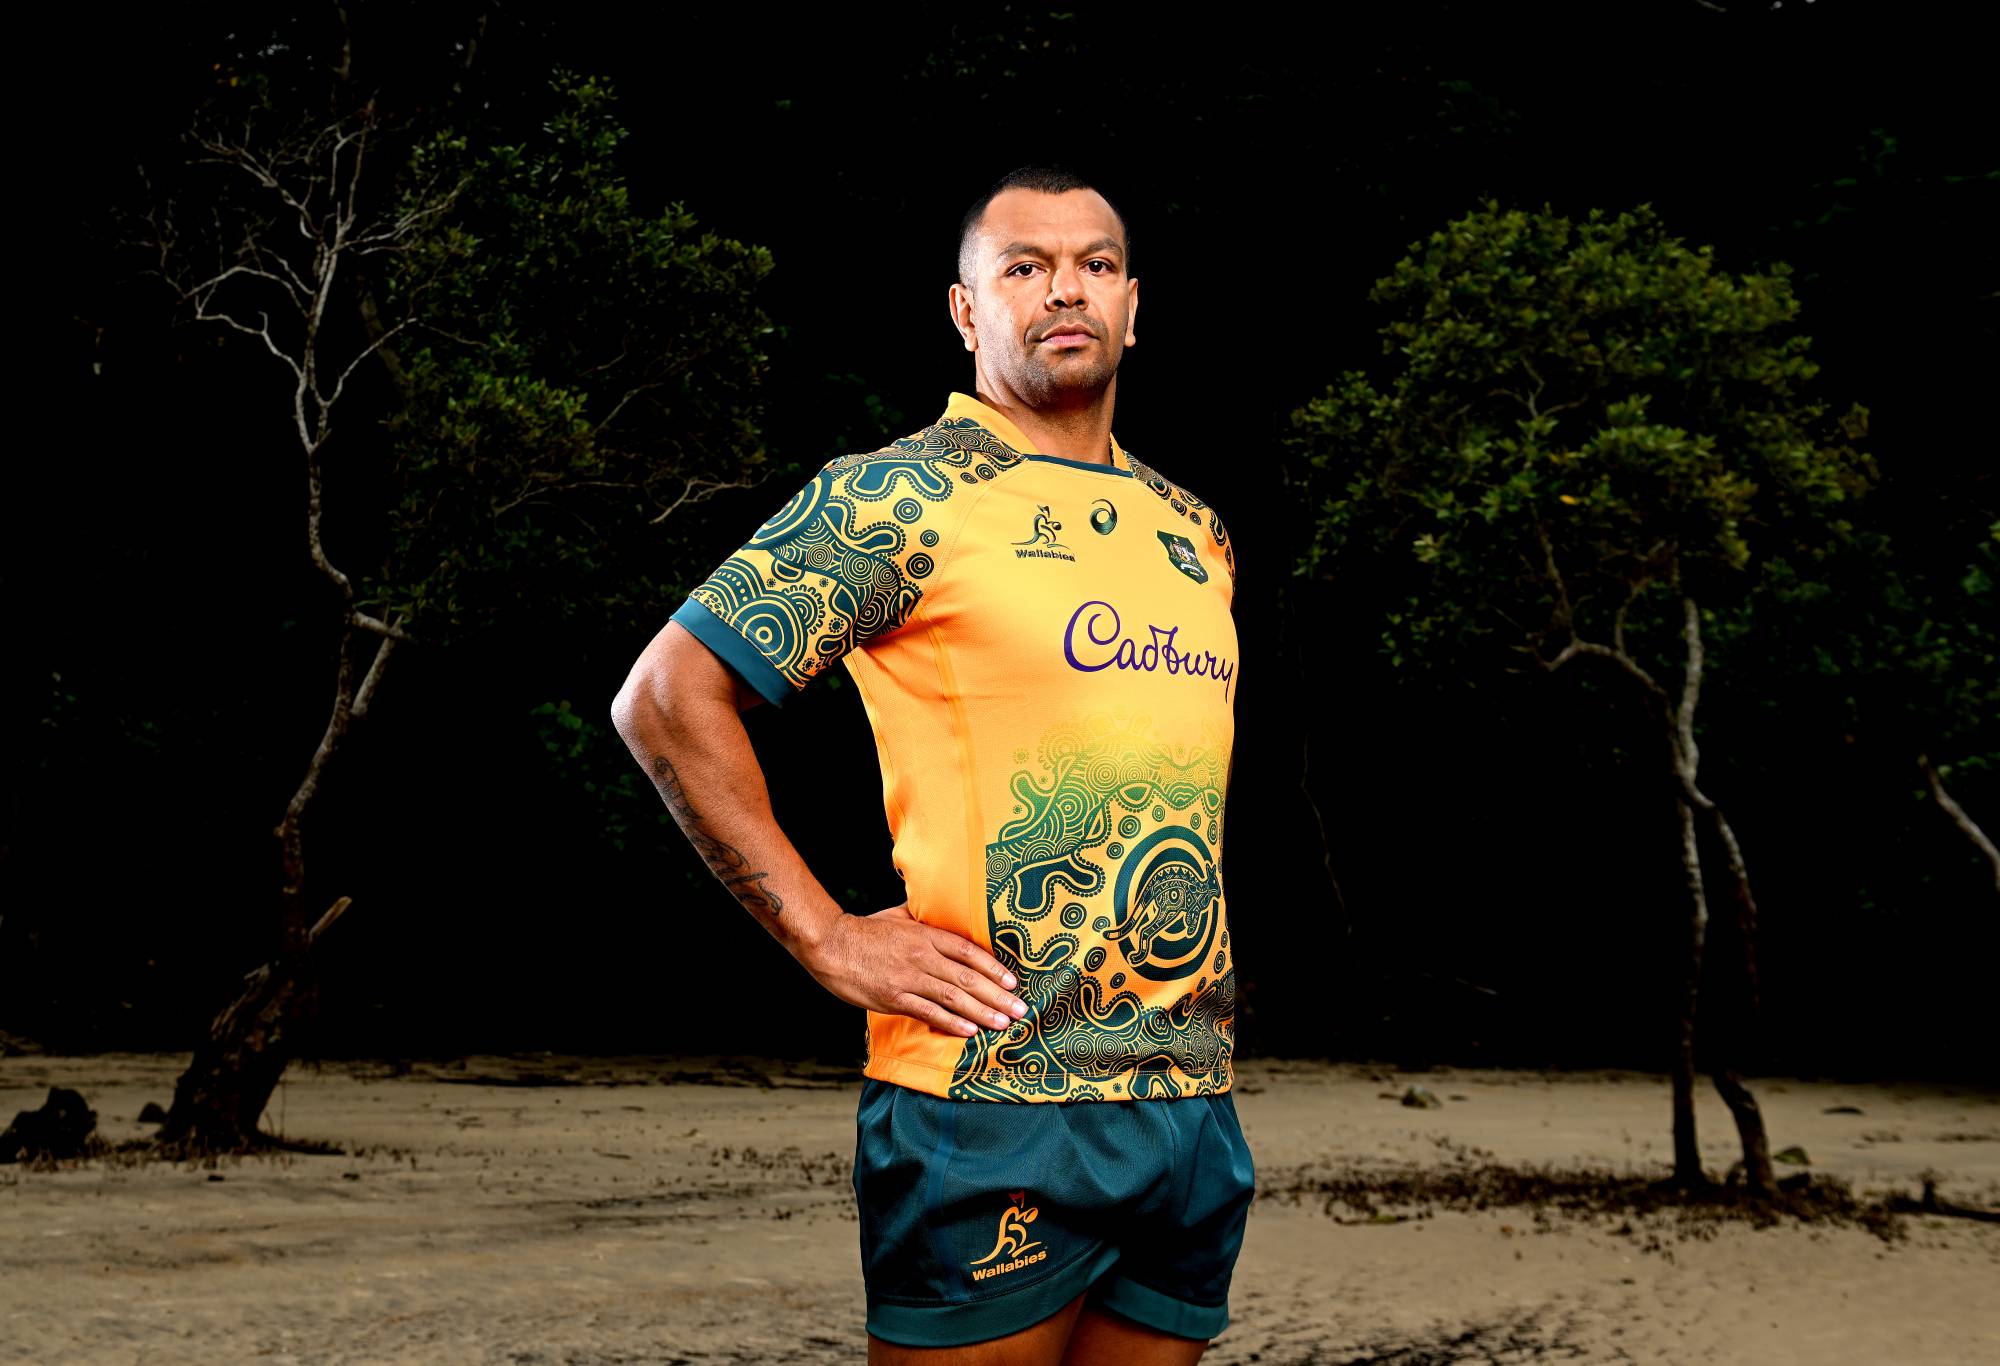 Kurtley Beale poses for a photo during the Wallabies Indigenous Jersey Launch at the Jellurgal Aboriginal Cultural Center on July 4, 2022 in Gold Coast, Australia. (Photo by Bradley Kanaris/Getty Images)